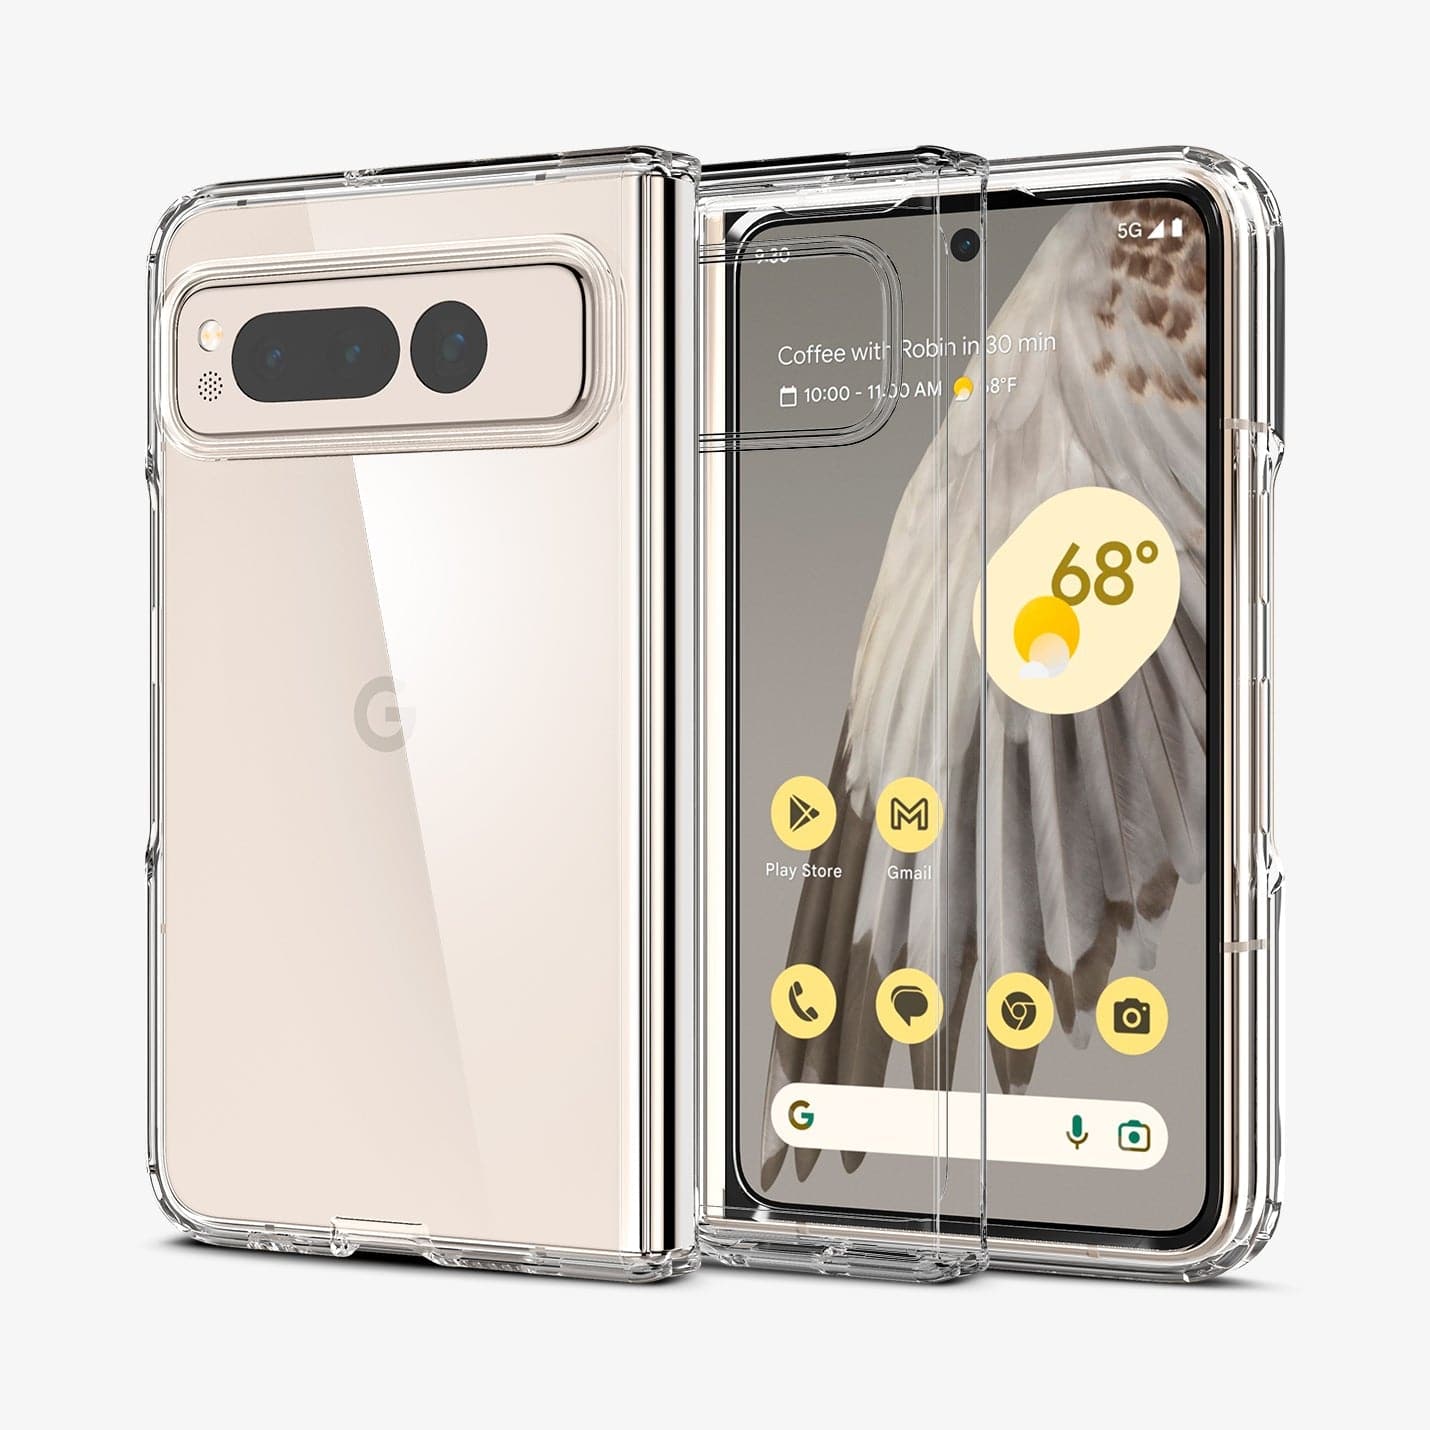 ACS05921 - Pixel Fold Series Case Ultra Hybrid in crystal clear showing the back, inside and front